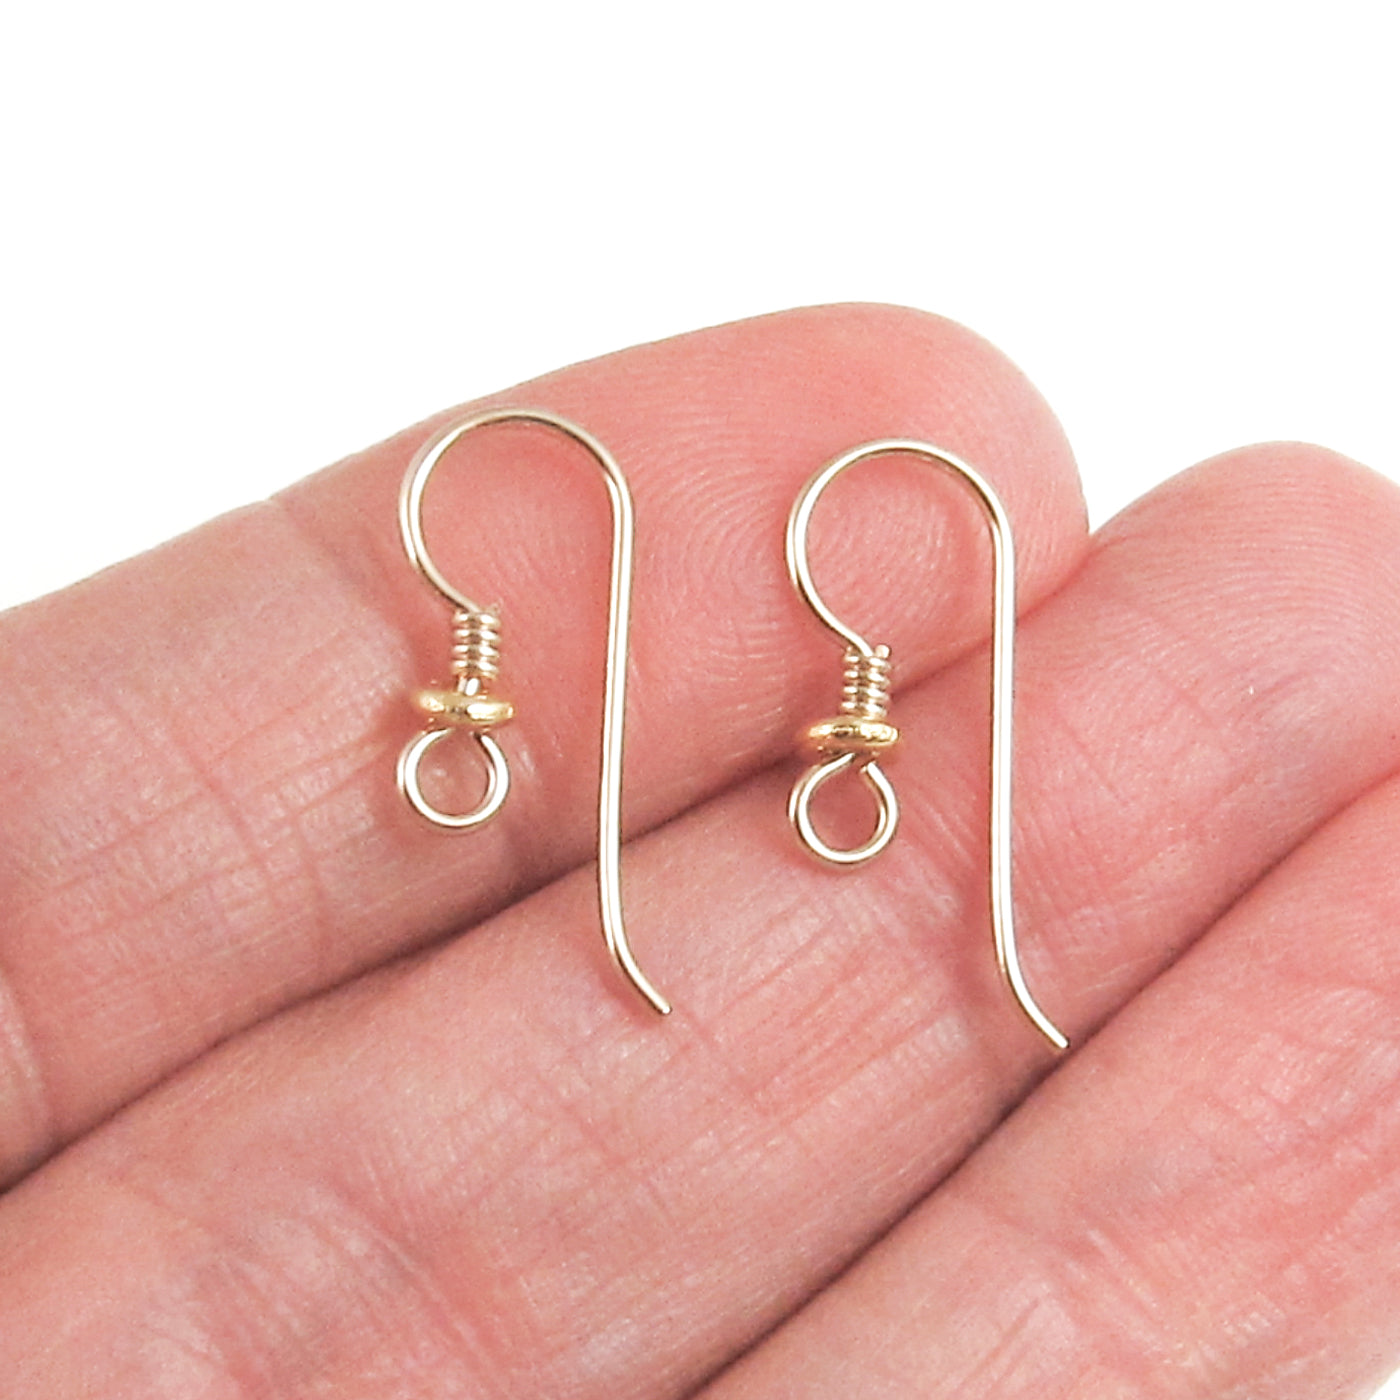 14/20 Gold Filled Rounded Earring Wires – Betty Brite Findings